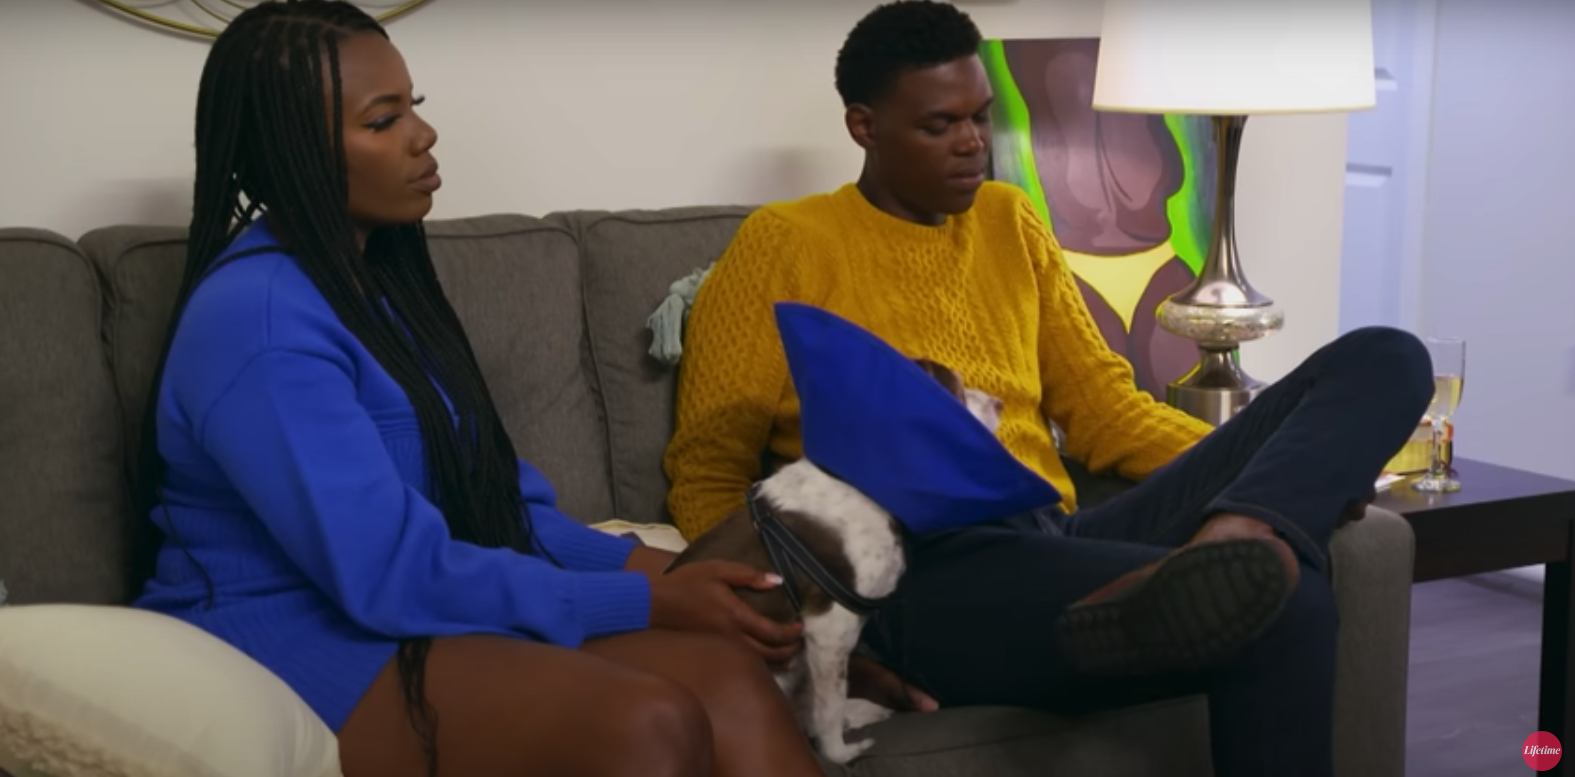 ‘Married at First Sight’: Alexis Gives Justin an Ultimatum After Disturbing Dog Attack